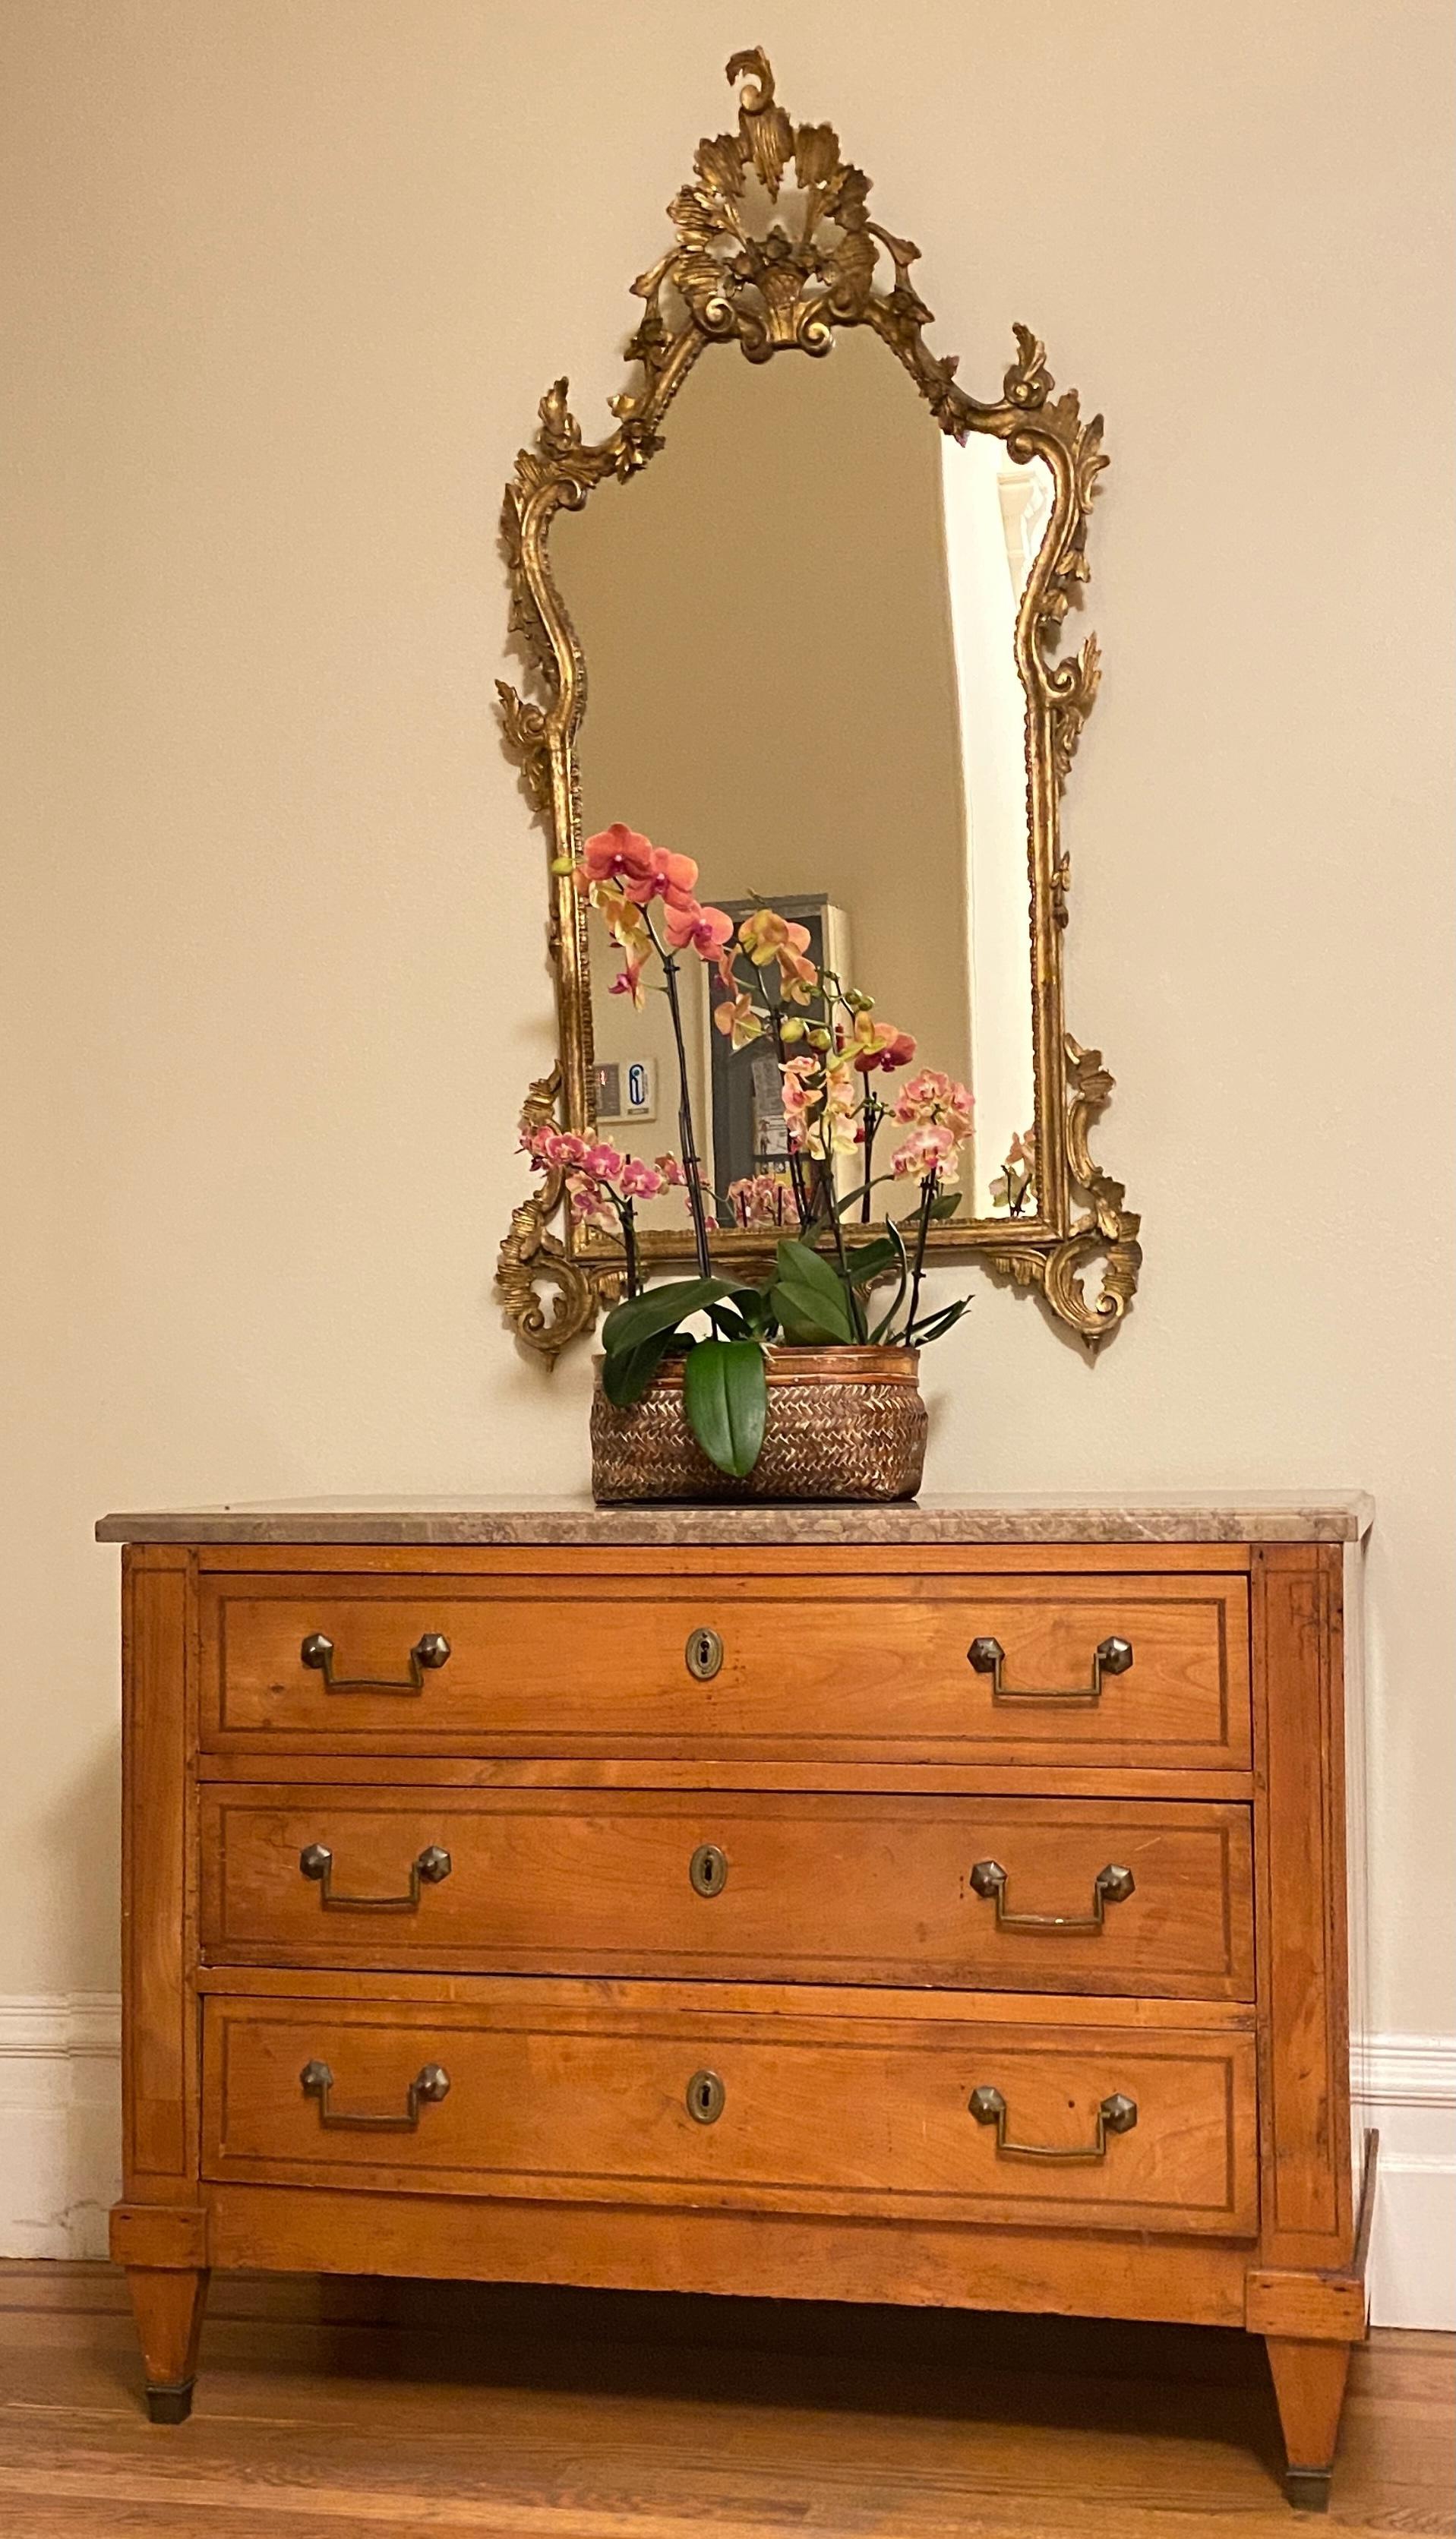 French 18th Century Cherry Wood Chest of Drawers  In Good Condition For Sale In San Francisco, CA